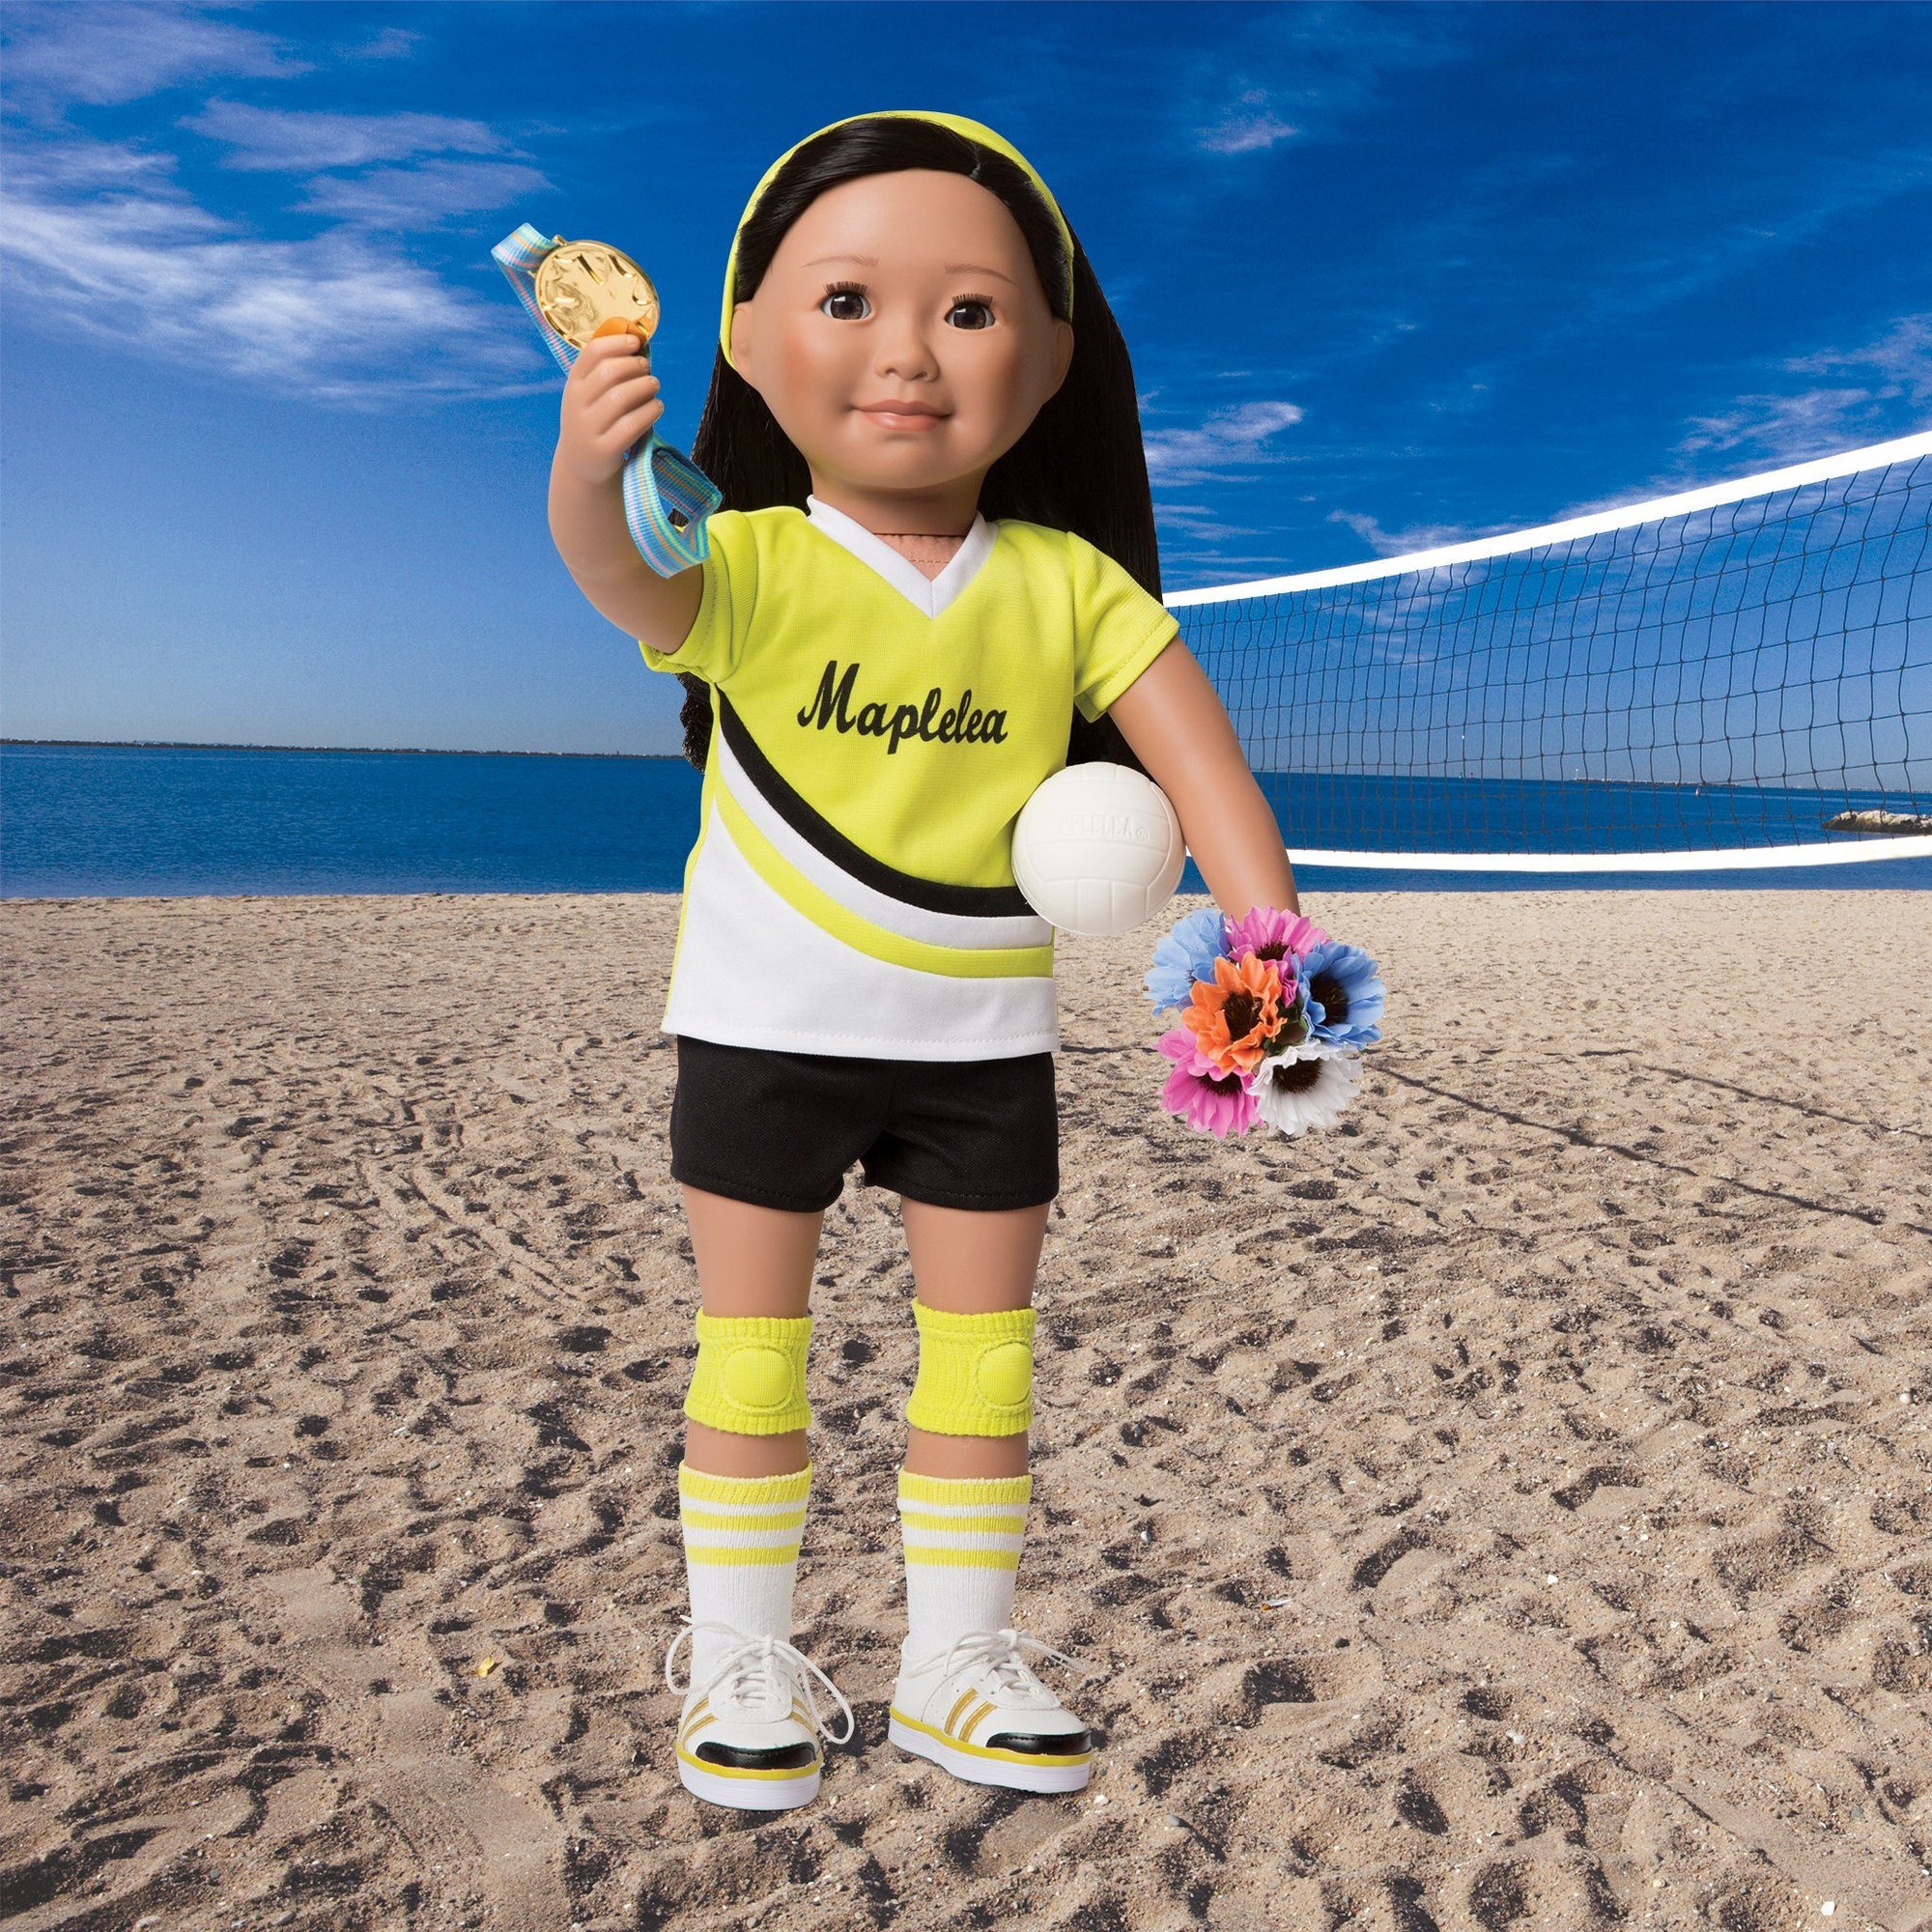 Serve, Set, Spike Volleyball Uniform and Ball | Outfit and Accessories for  18 Inch Dolls